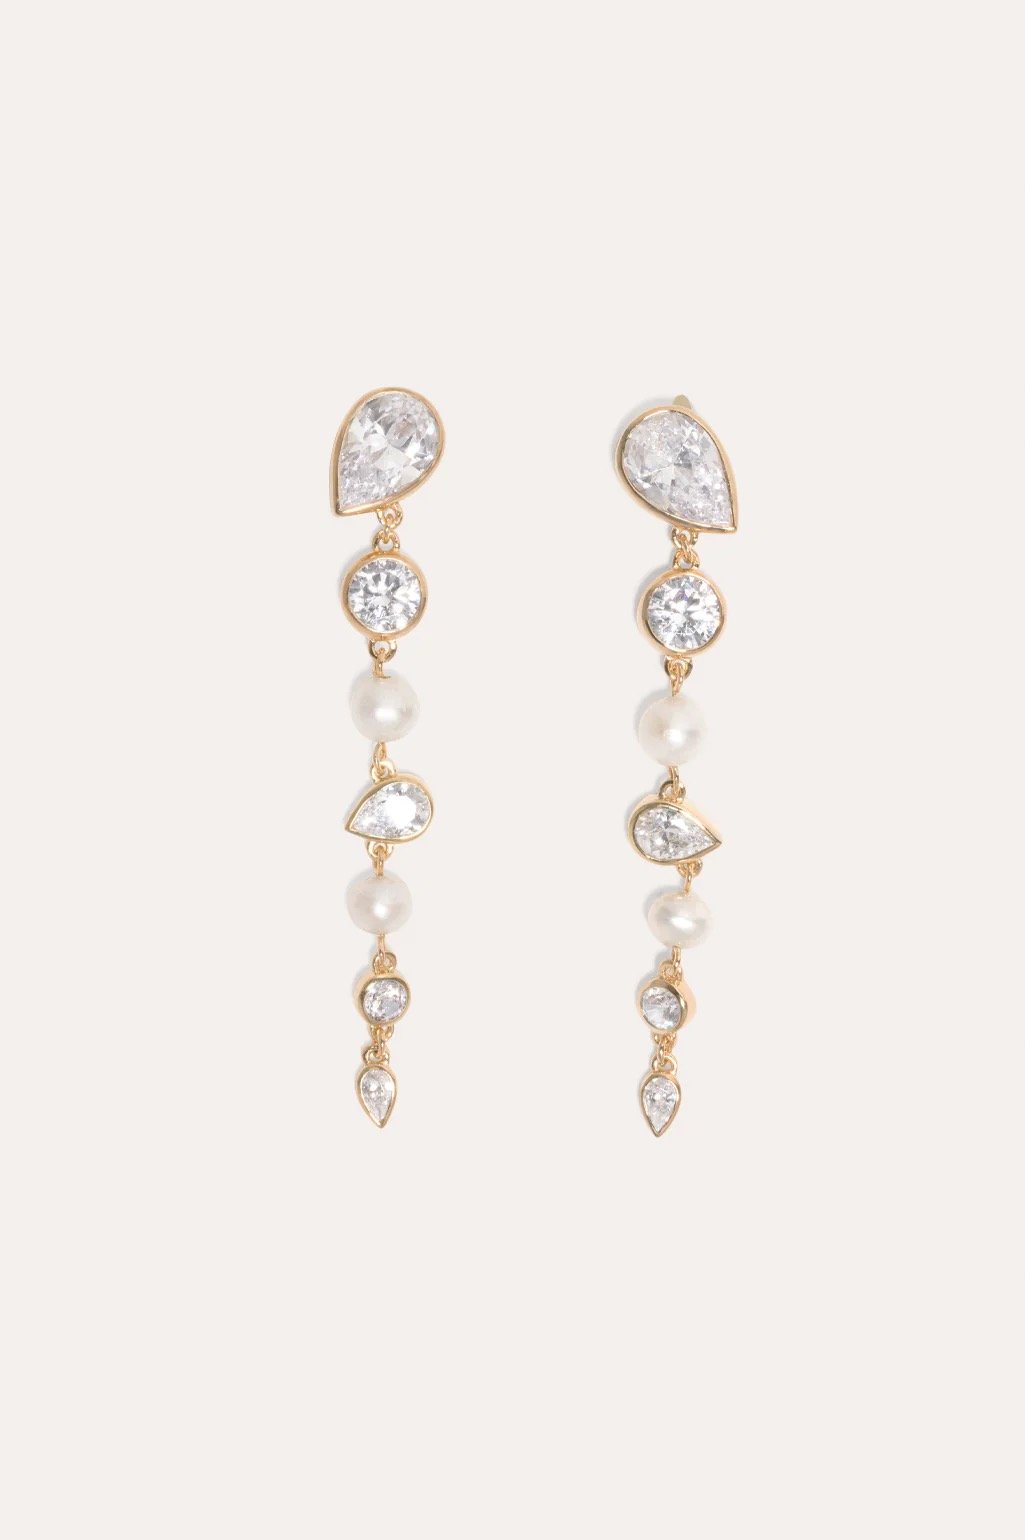 Completedworks What's The Big Idea Earrings — The Fall Bride